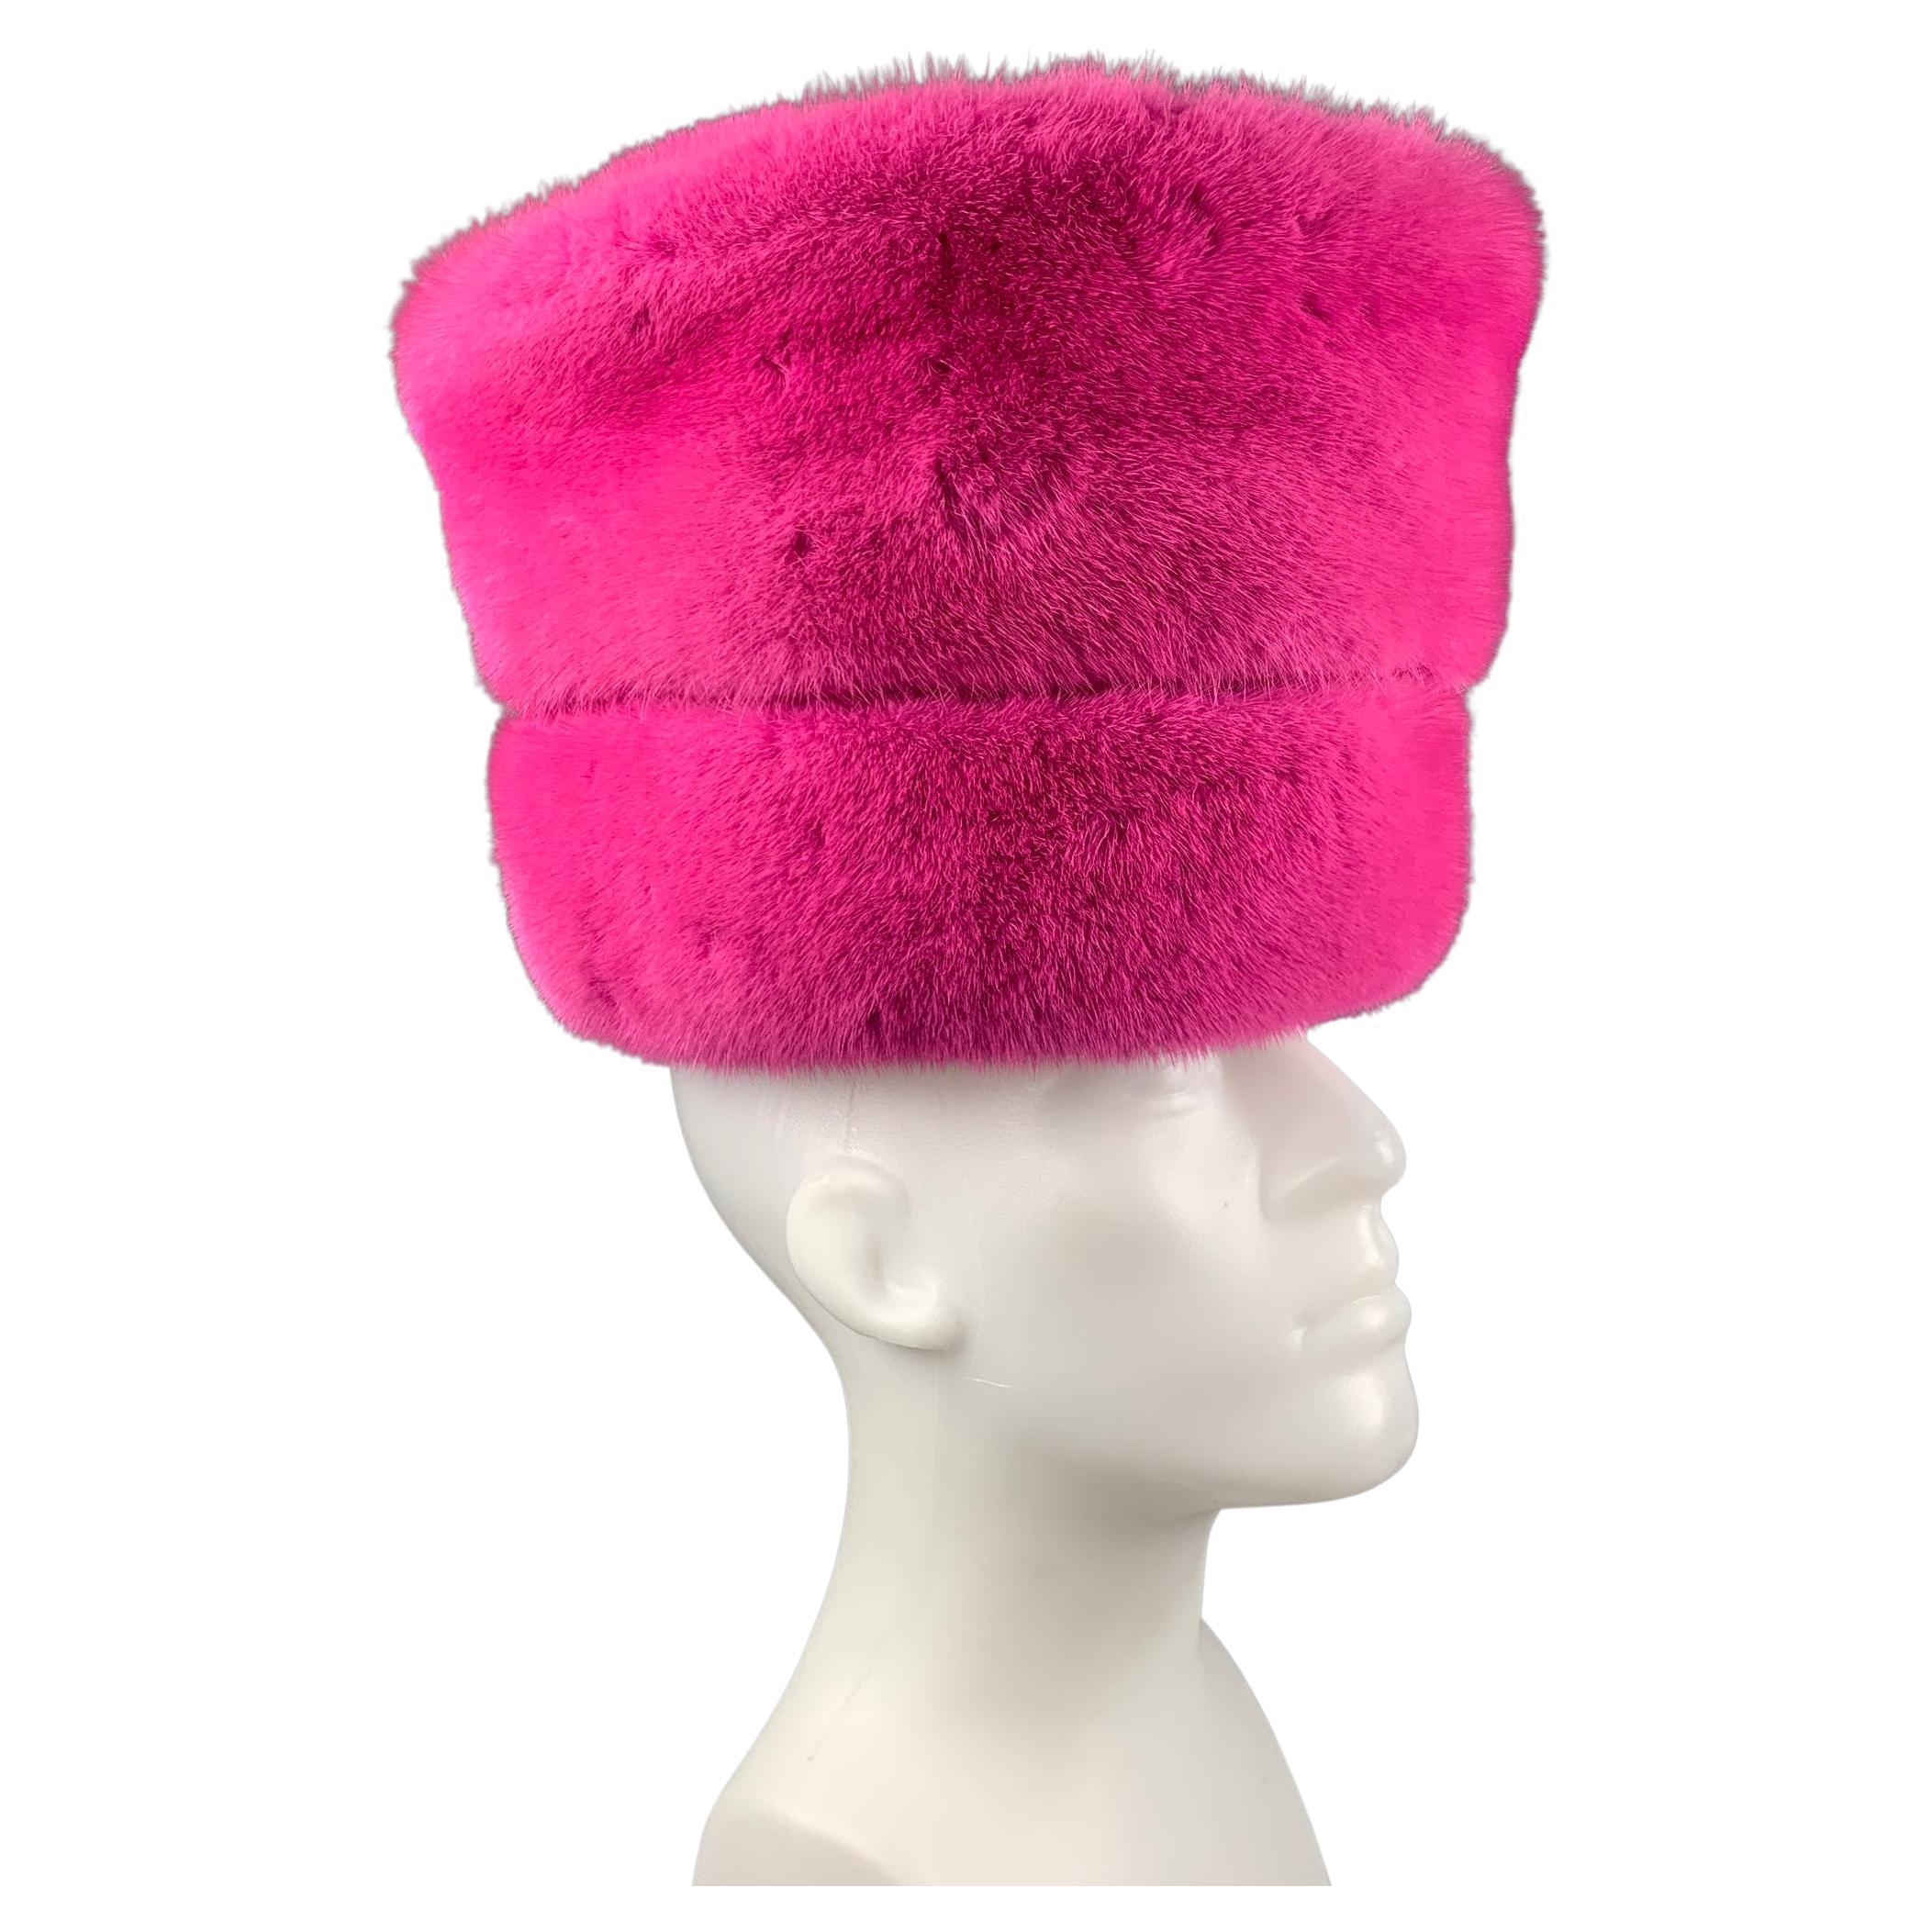 SUZANNE Pink Textured Mink Fur Couture Millinery Hat